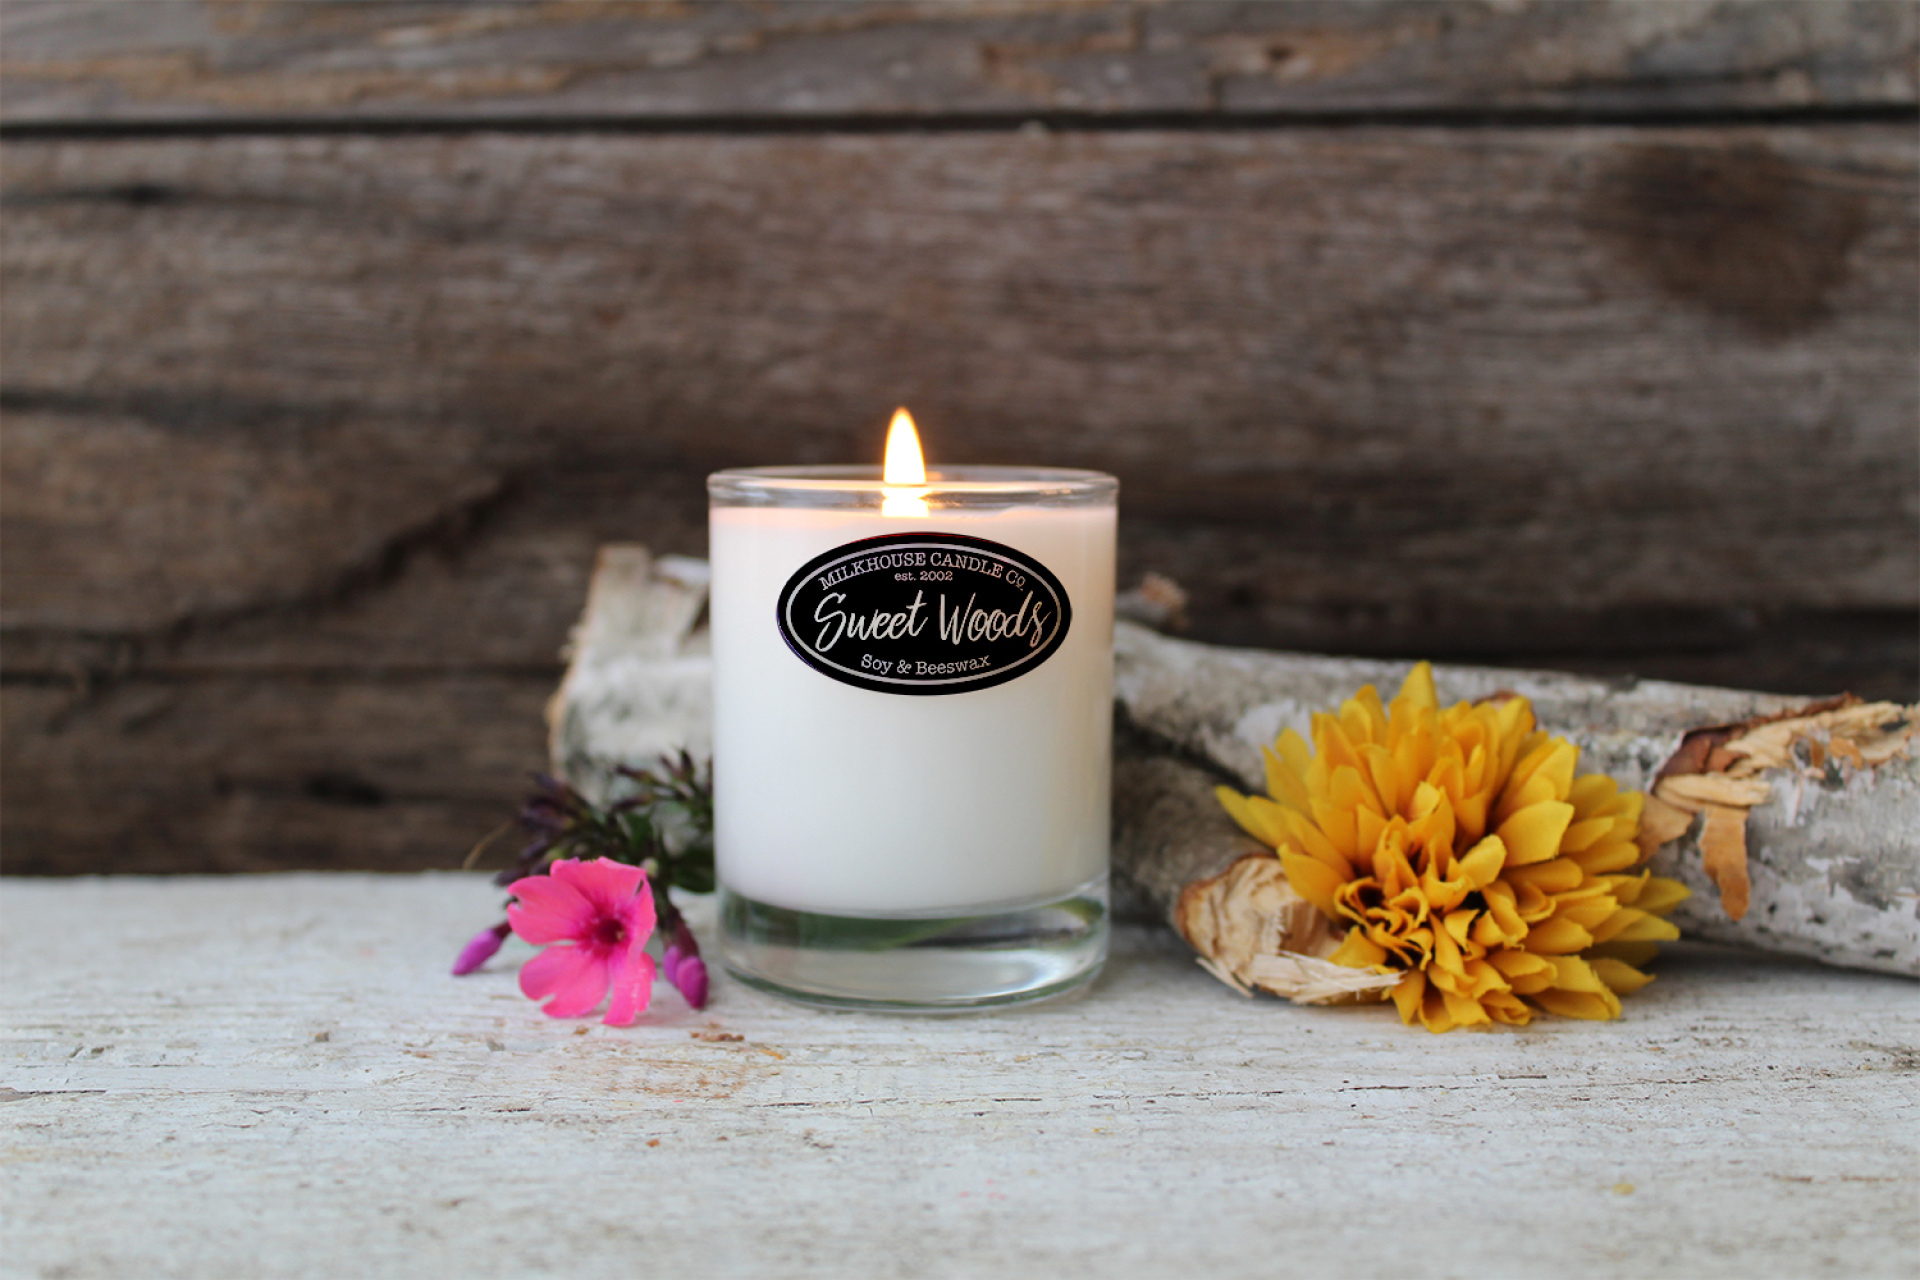 Milkhouse Creamery Candles - The Happy Sunflower intérieur Tuscany Candle Kitchen Spice